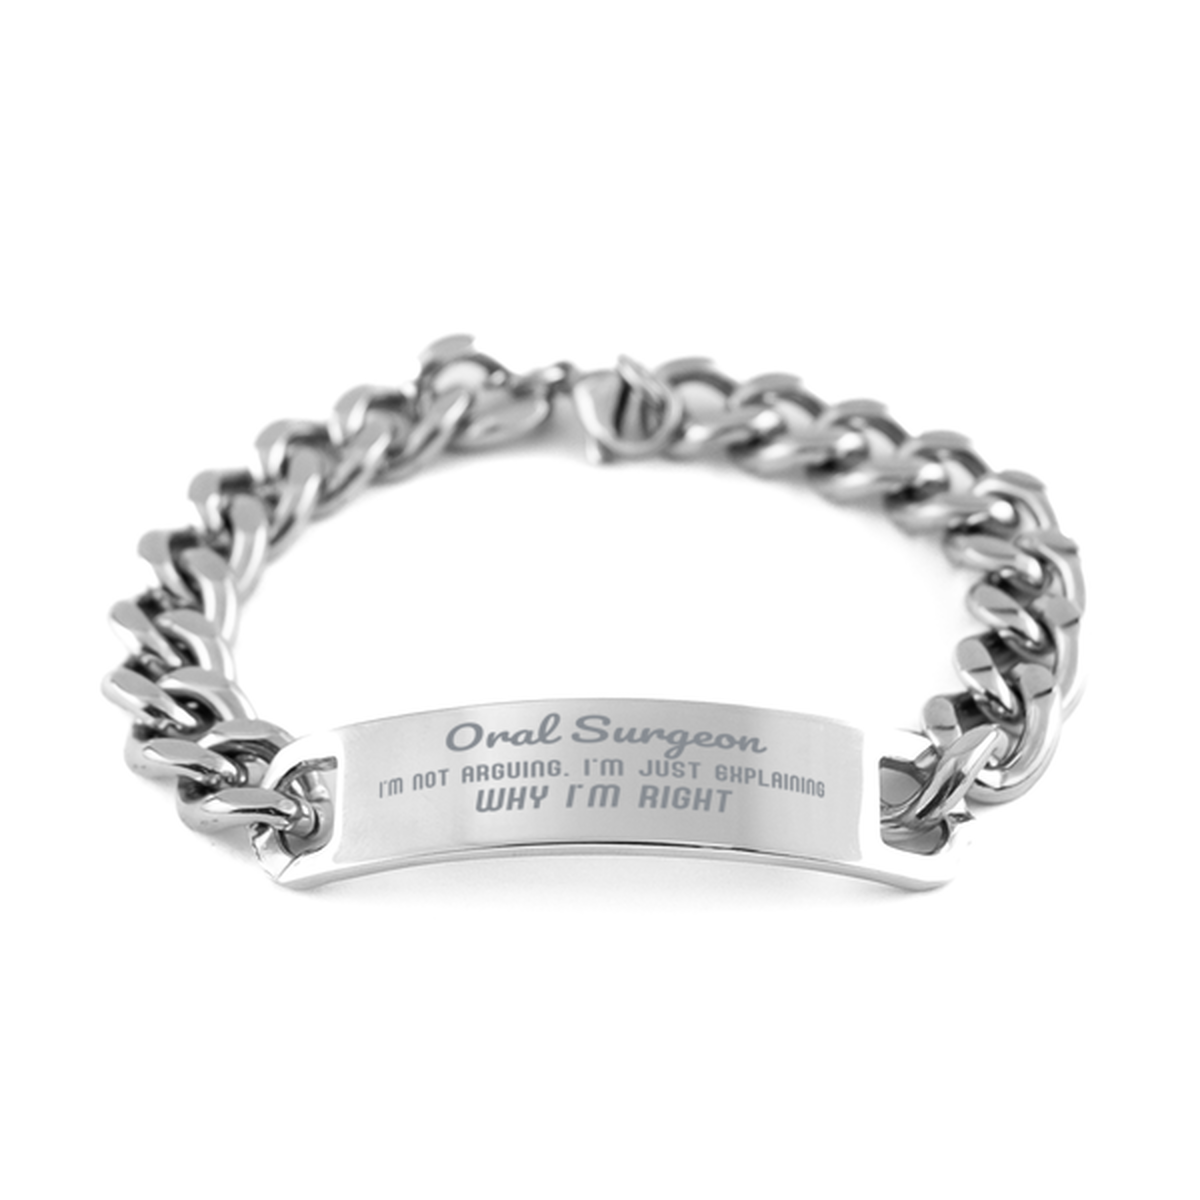 Oral Surgeon I'm not Arguing. I'm Just Explaining Why I'm RIGHT Cuban Chain Stainless Steel Bracelet, Graduation Birthday Christmas Oral Surgeon Gifts For Oral Surgeon Funny Saying Quote Present for Men Women Coworker